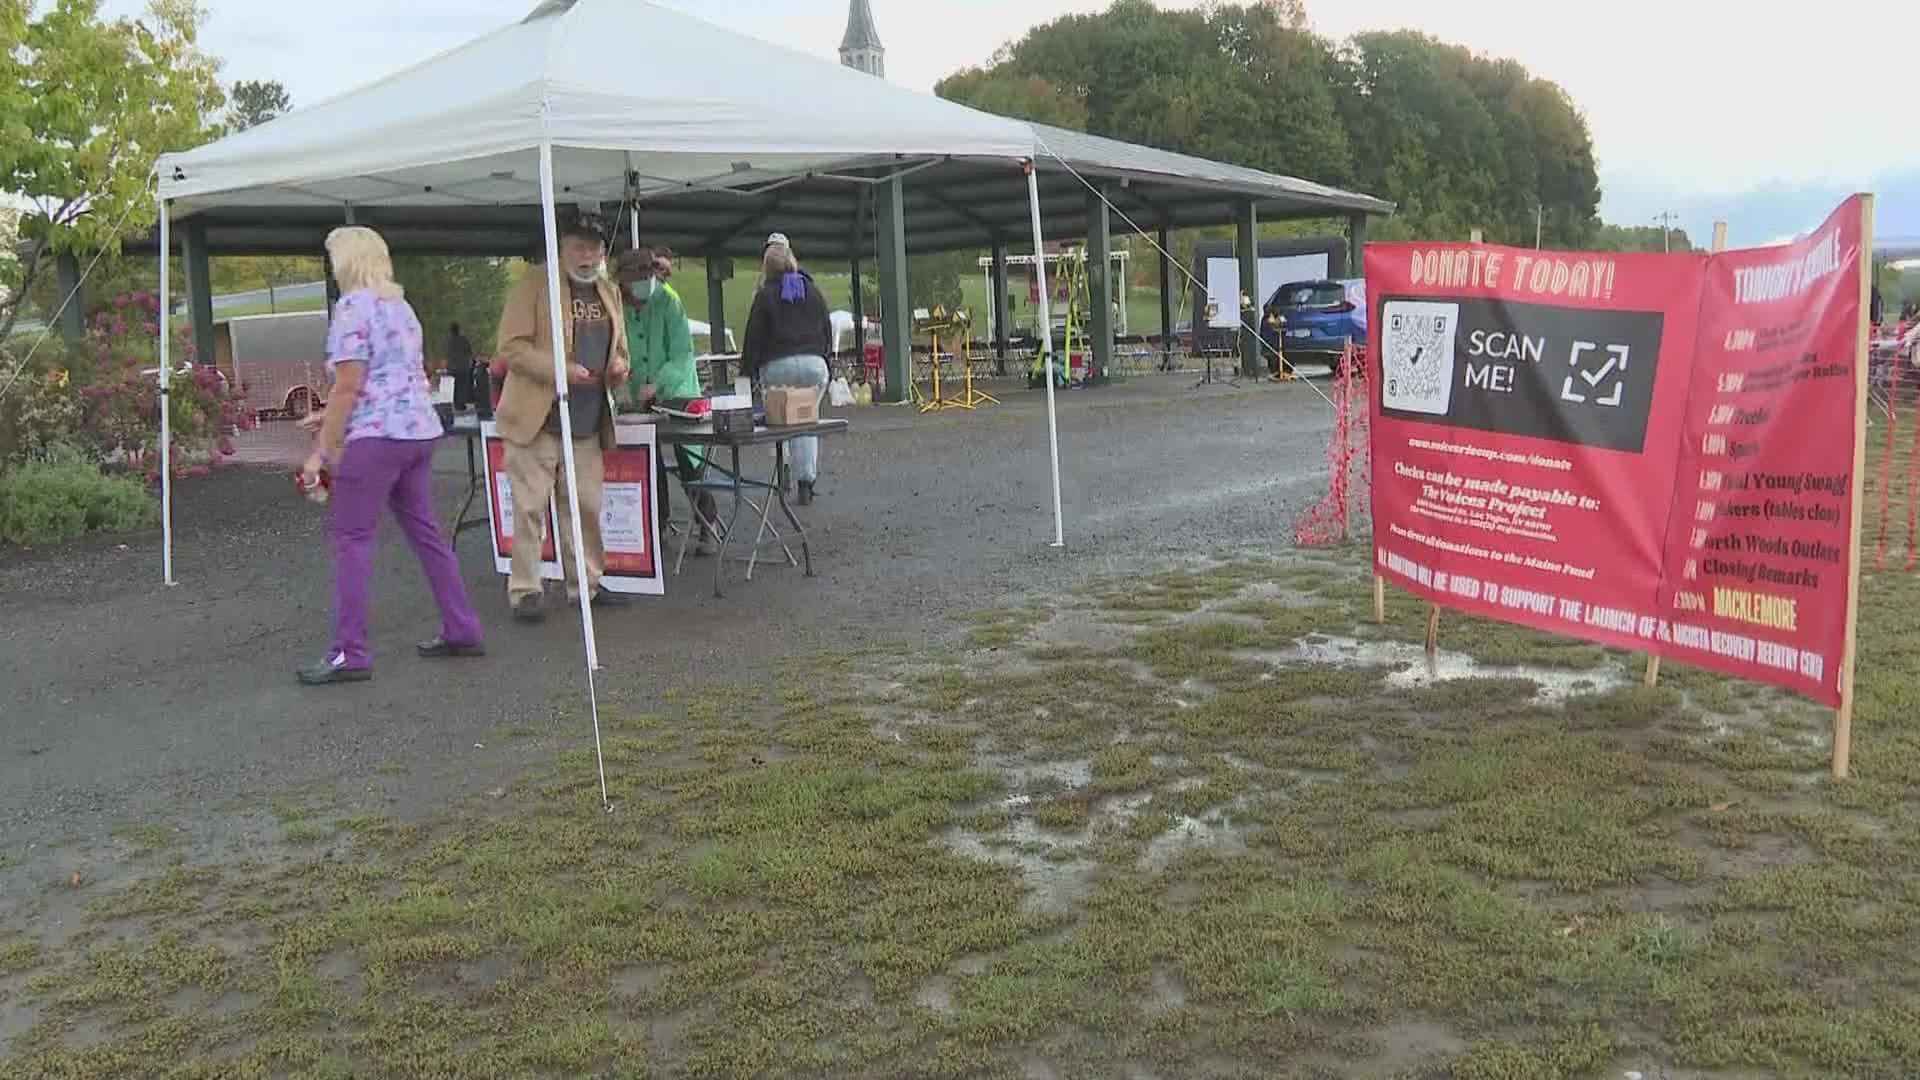 The goal of the 'Recover Out Loud in Maine's Capital' event is to raise money to open a recovery center in Augusta for those struggling with drug addiction.